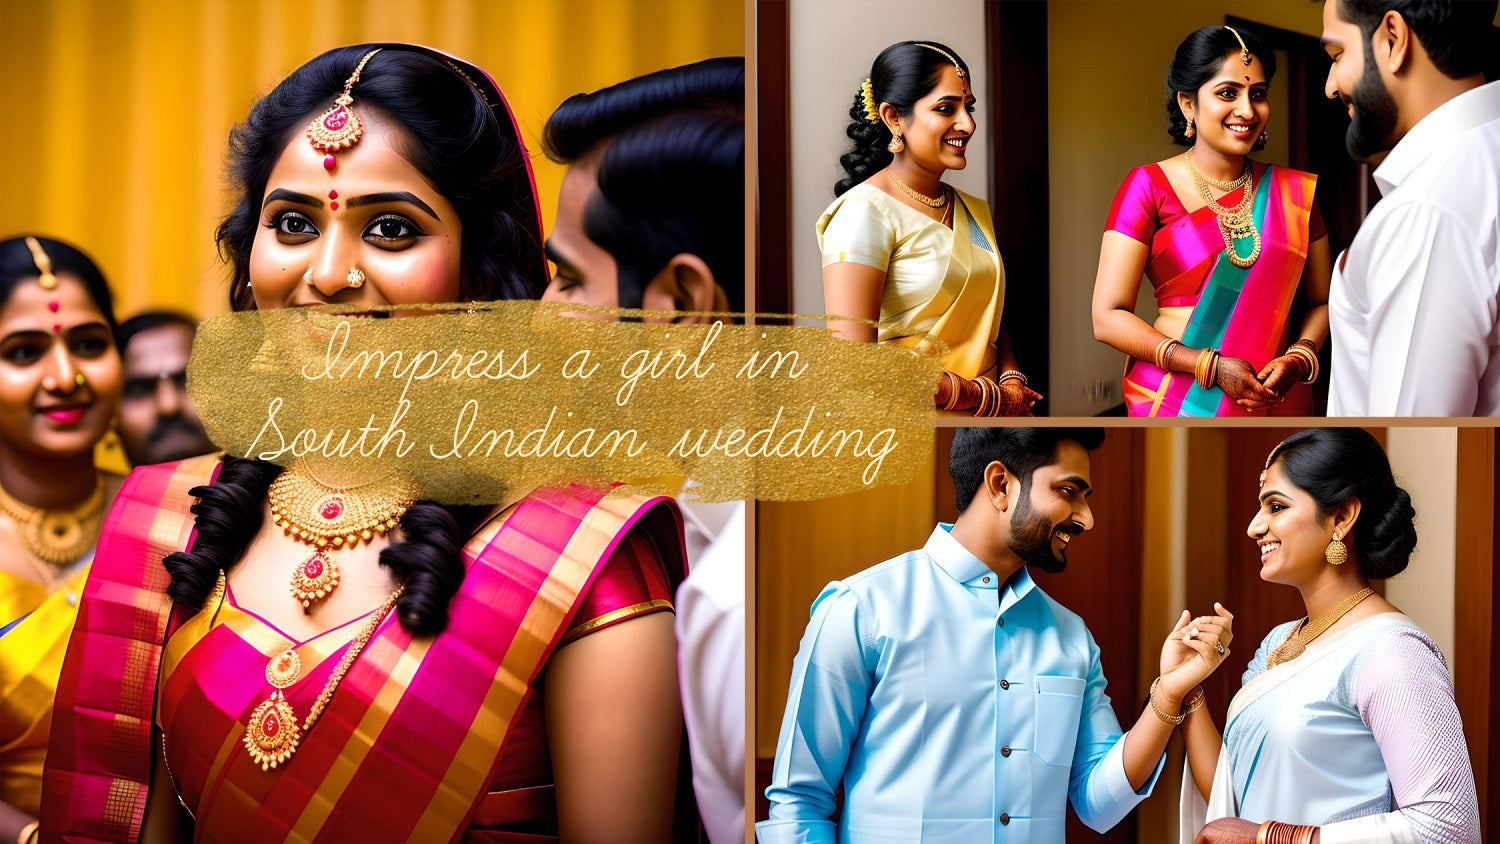 Mastering the Art of Impressing a Girl at a South Indian Wedding with Indian Ethnic Wear